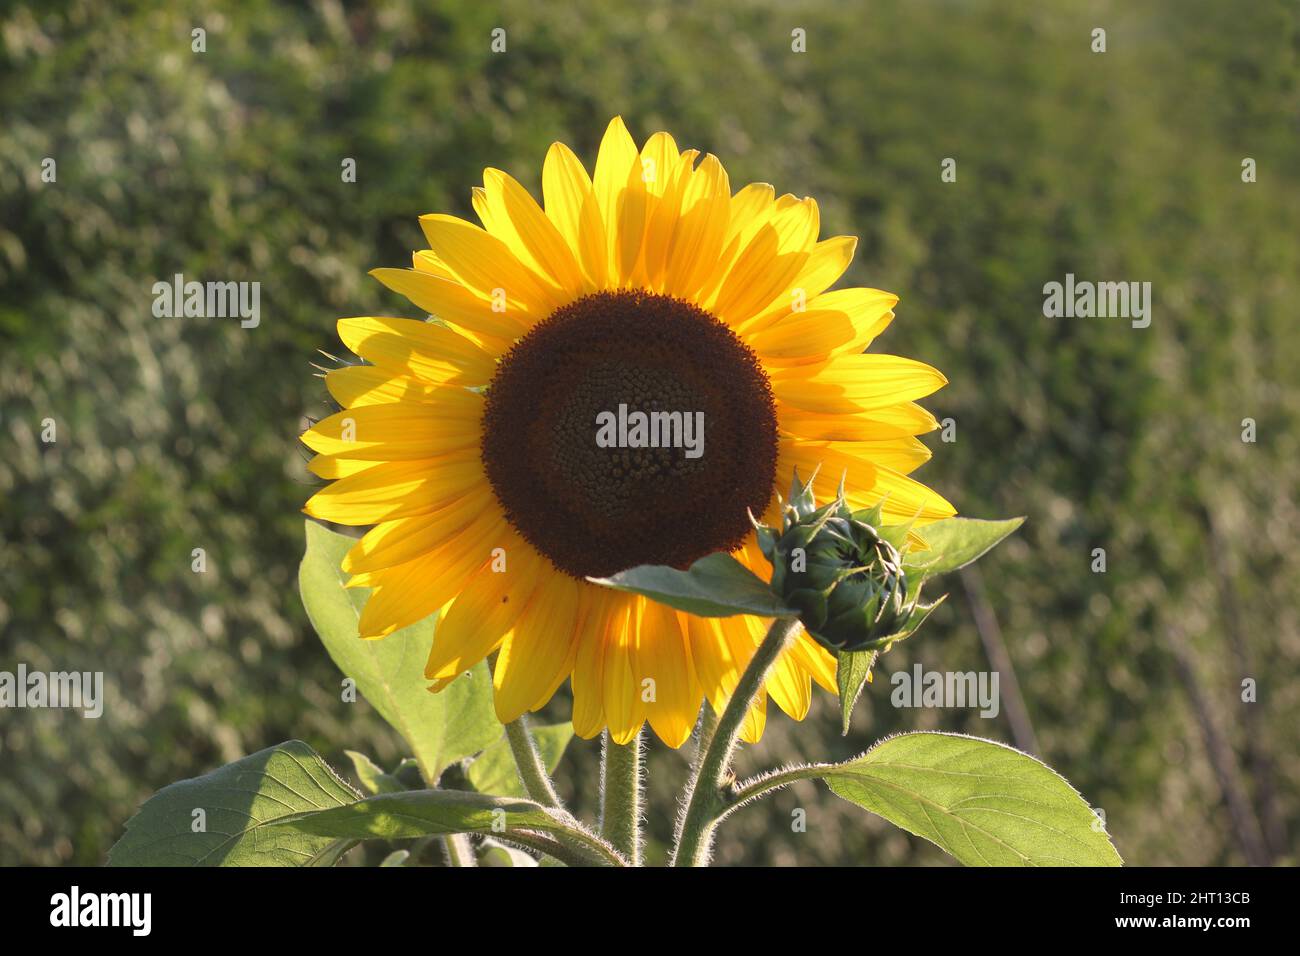 Blooming sunflower with flower bud formation. Stock Photo